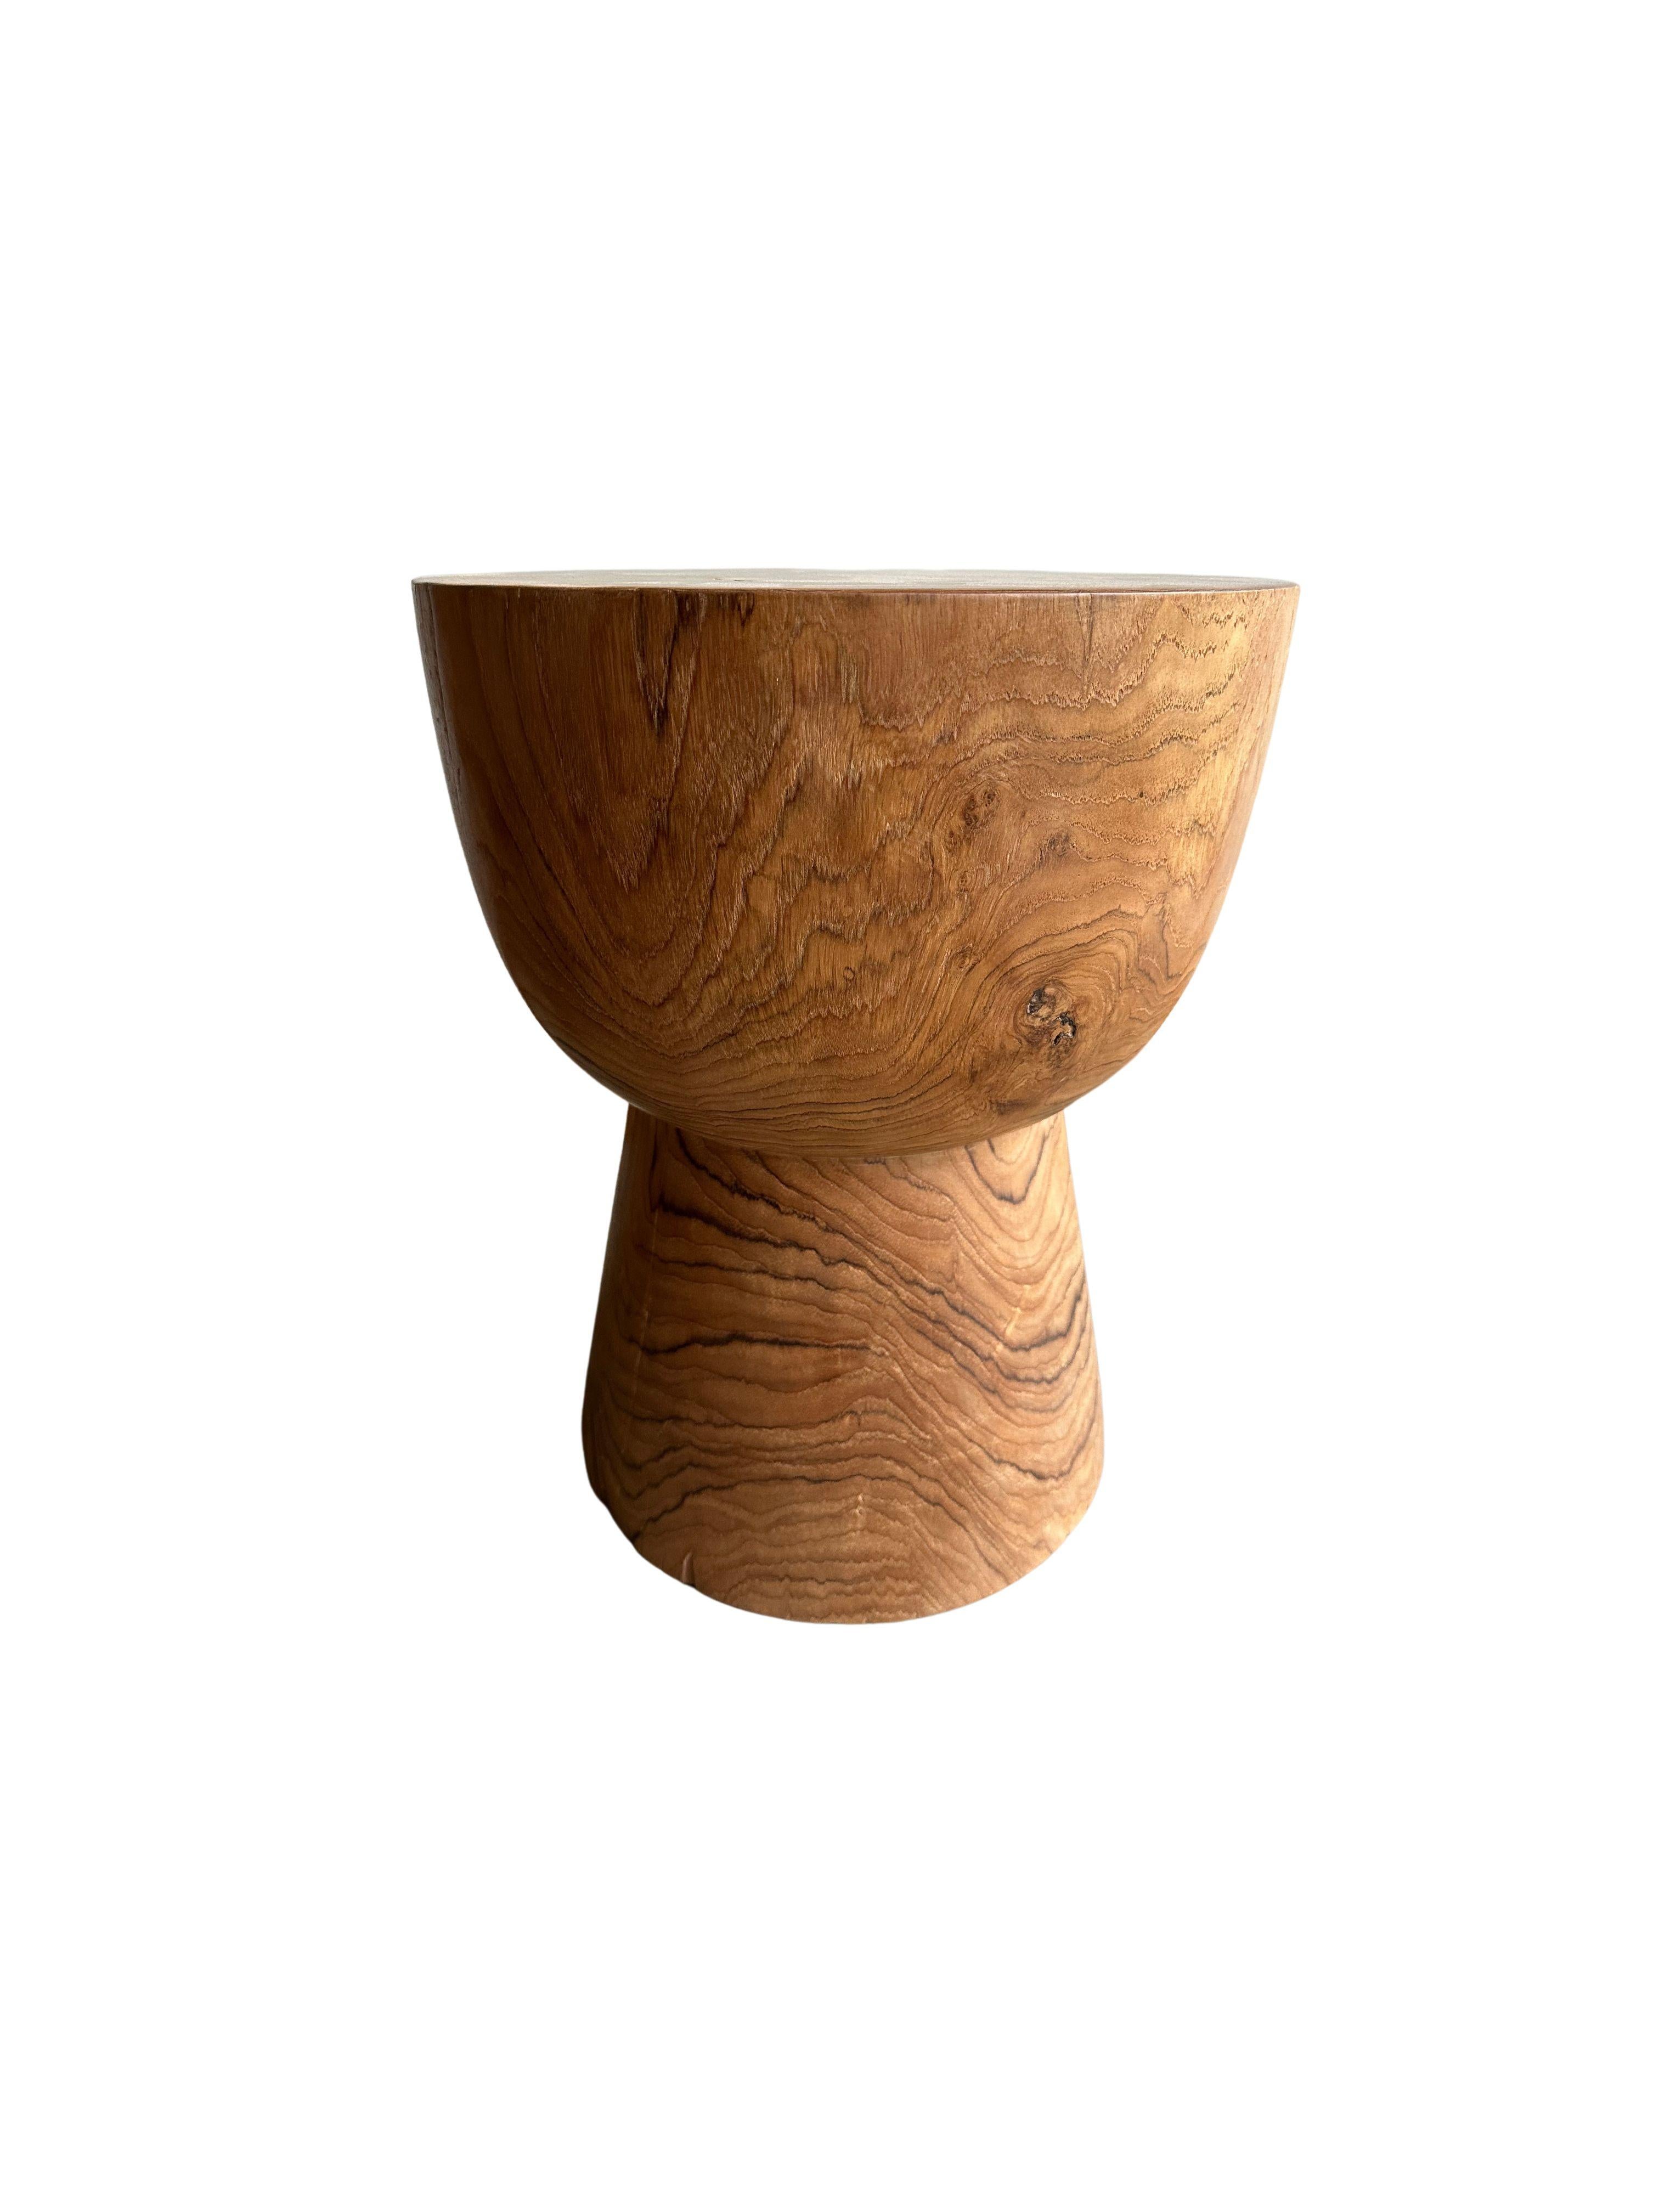 Hand-Crafted Sculptural Teak Wood Side Table, with Stunning Wood Textures, Modern Organic